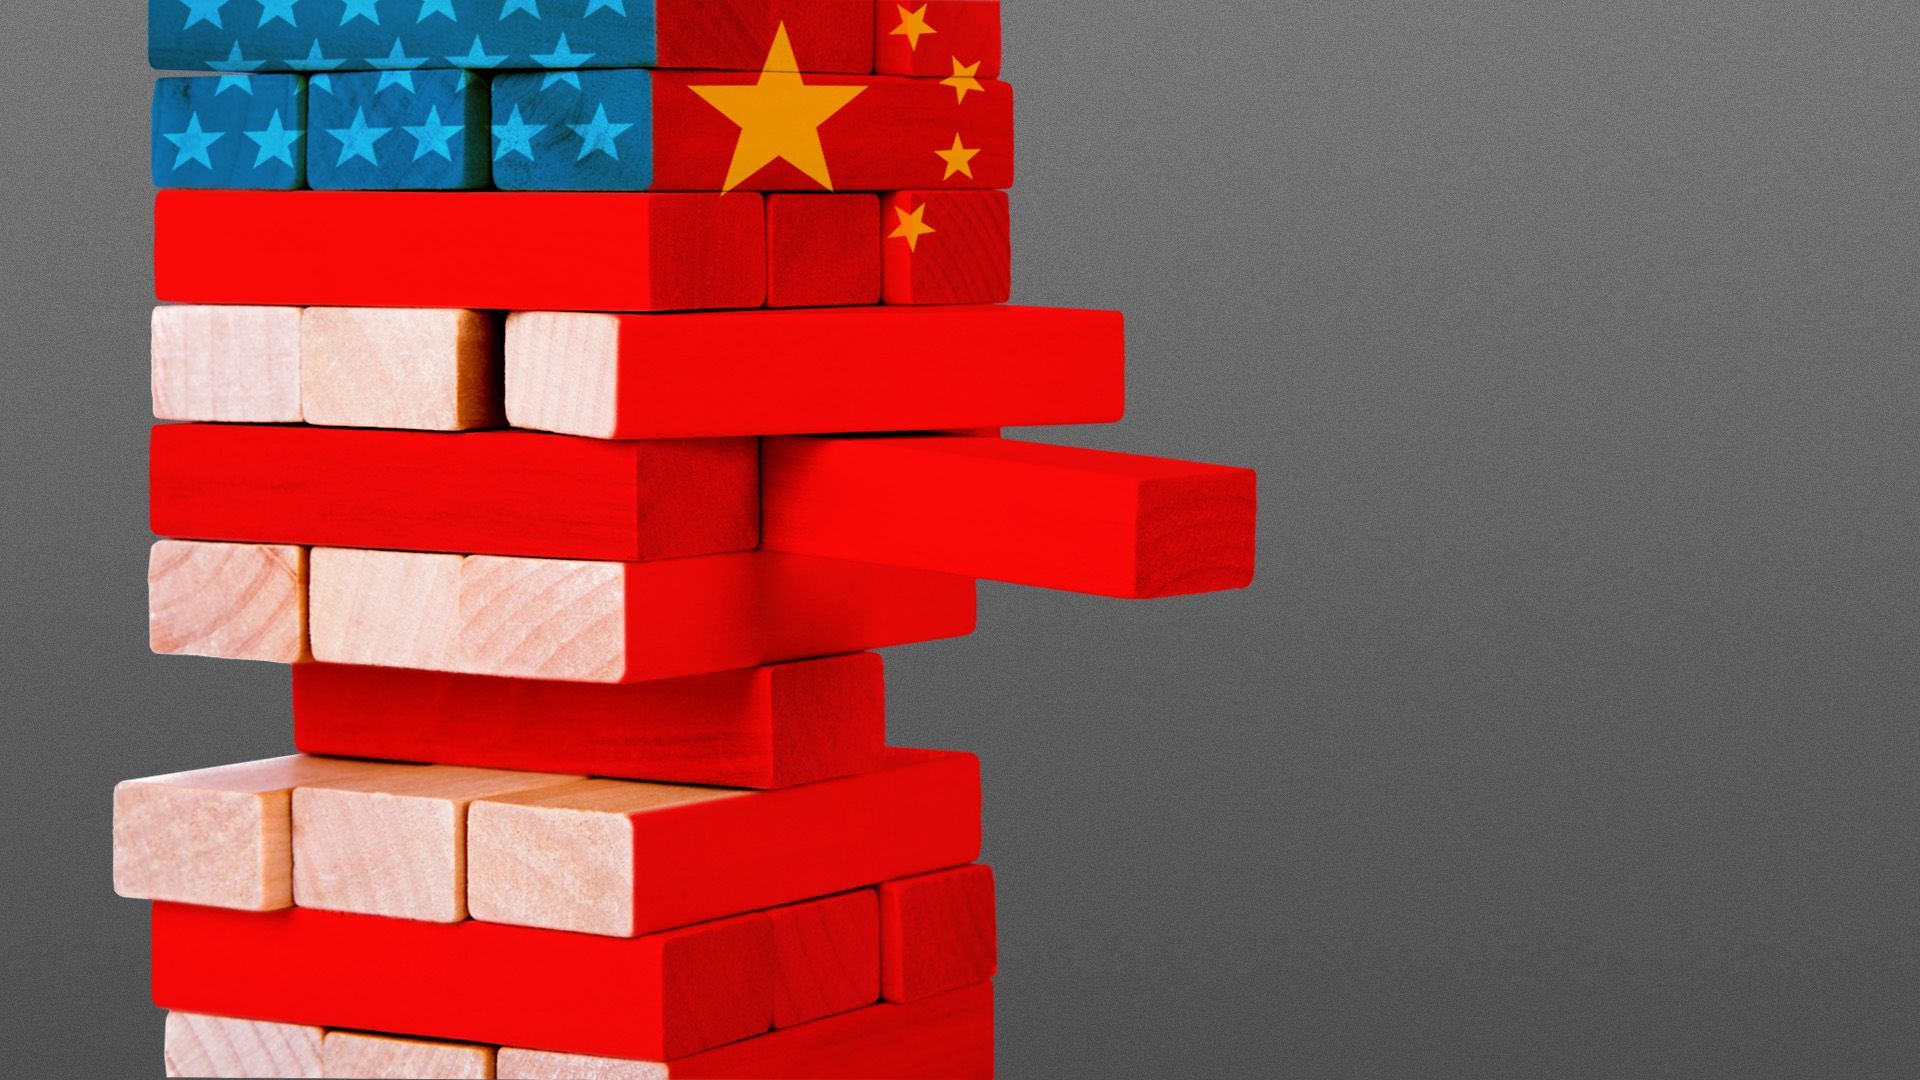 Illustration of a pile of jenga blocks with the colors and stars of the U.S. and Chinese flags